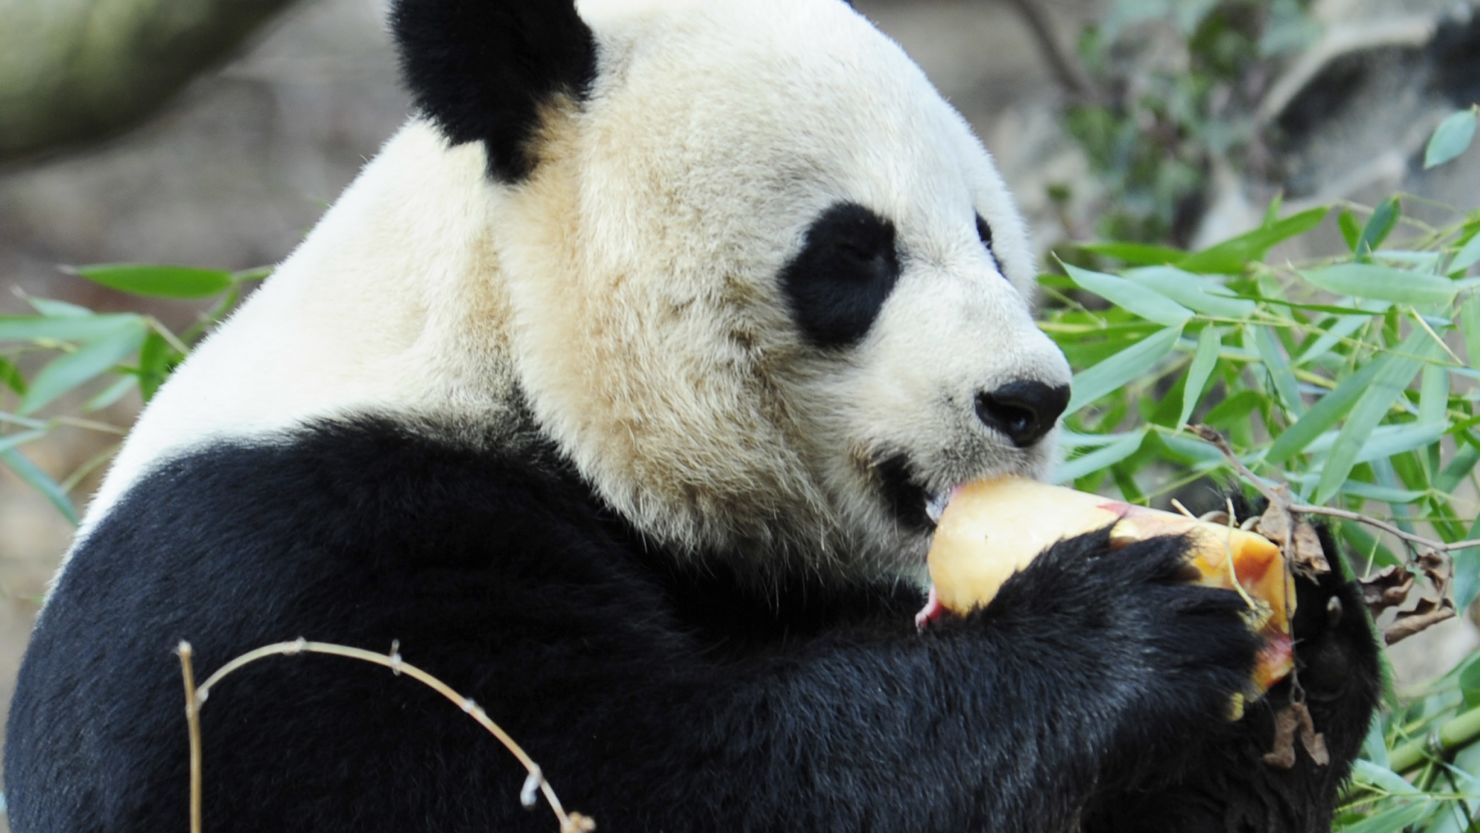 Mei Xiang gave birth to a female cub on September 16, 2012, but it died one week later.